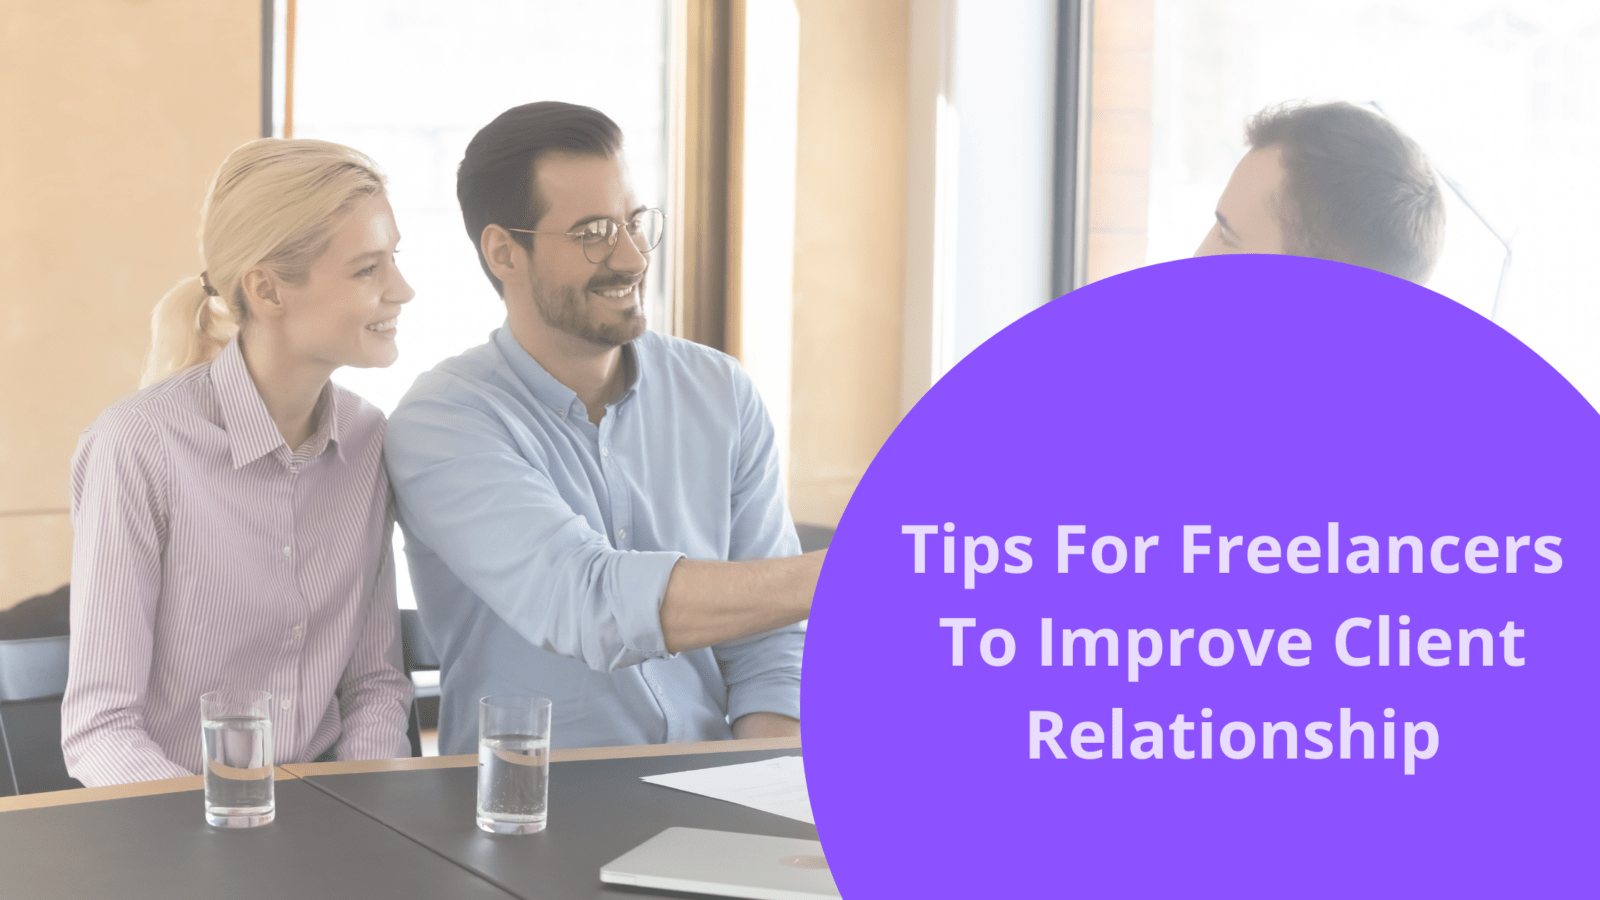 5 tips for freelancers to improve client relationship | bookafy